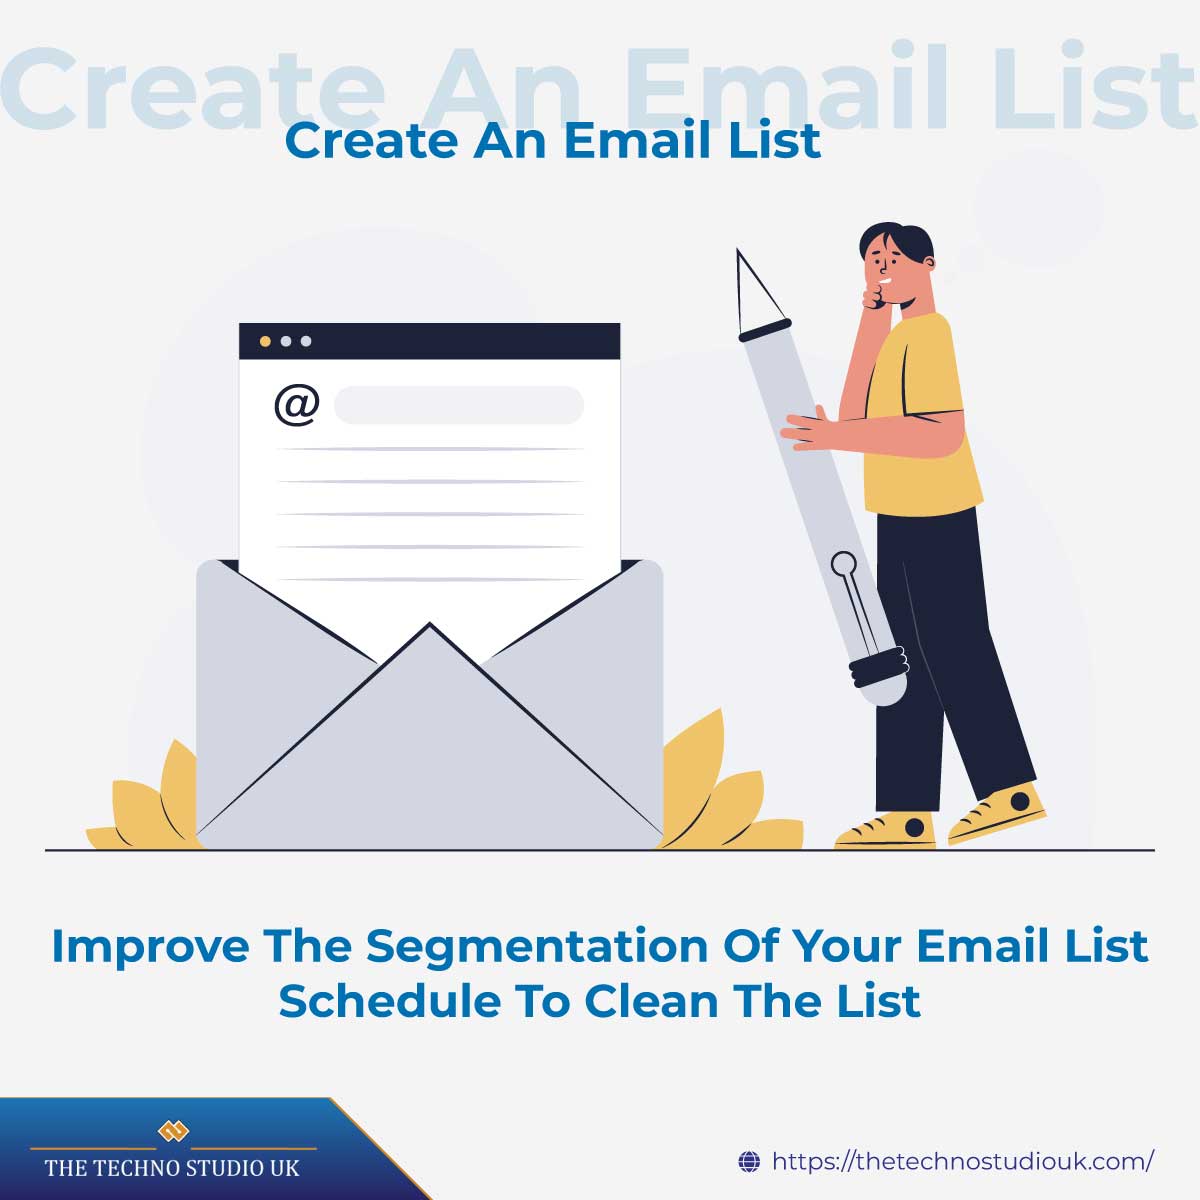 17 Email Marketing Best Practices For 2023